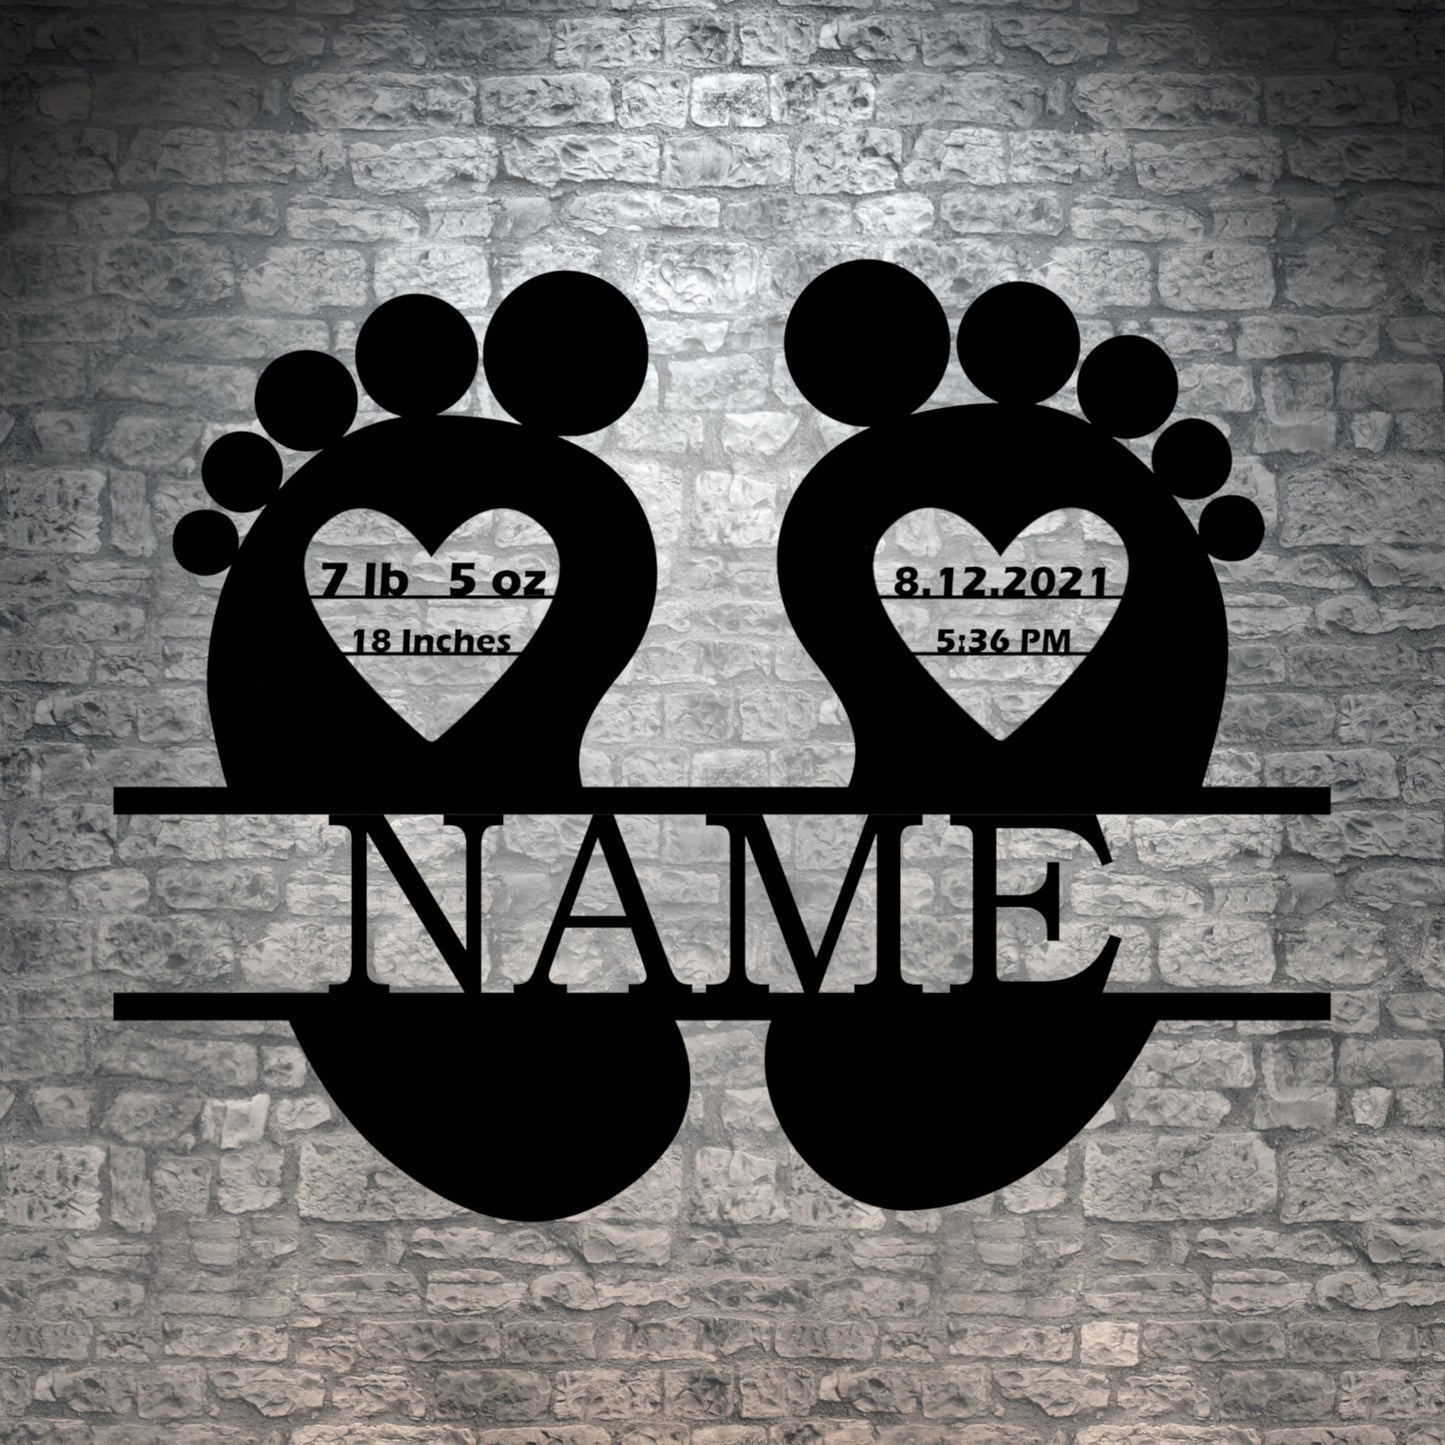 Personalized Baby Footprint Birth Announcement Metal Sign. Baby Shower Name Gift. Kids Room Decor. New Born Custom Baby Arrival Announcement